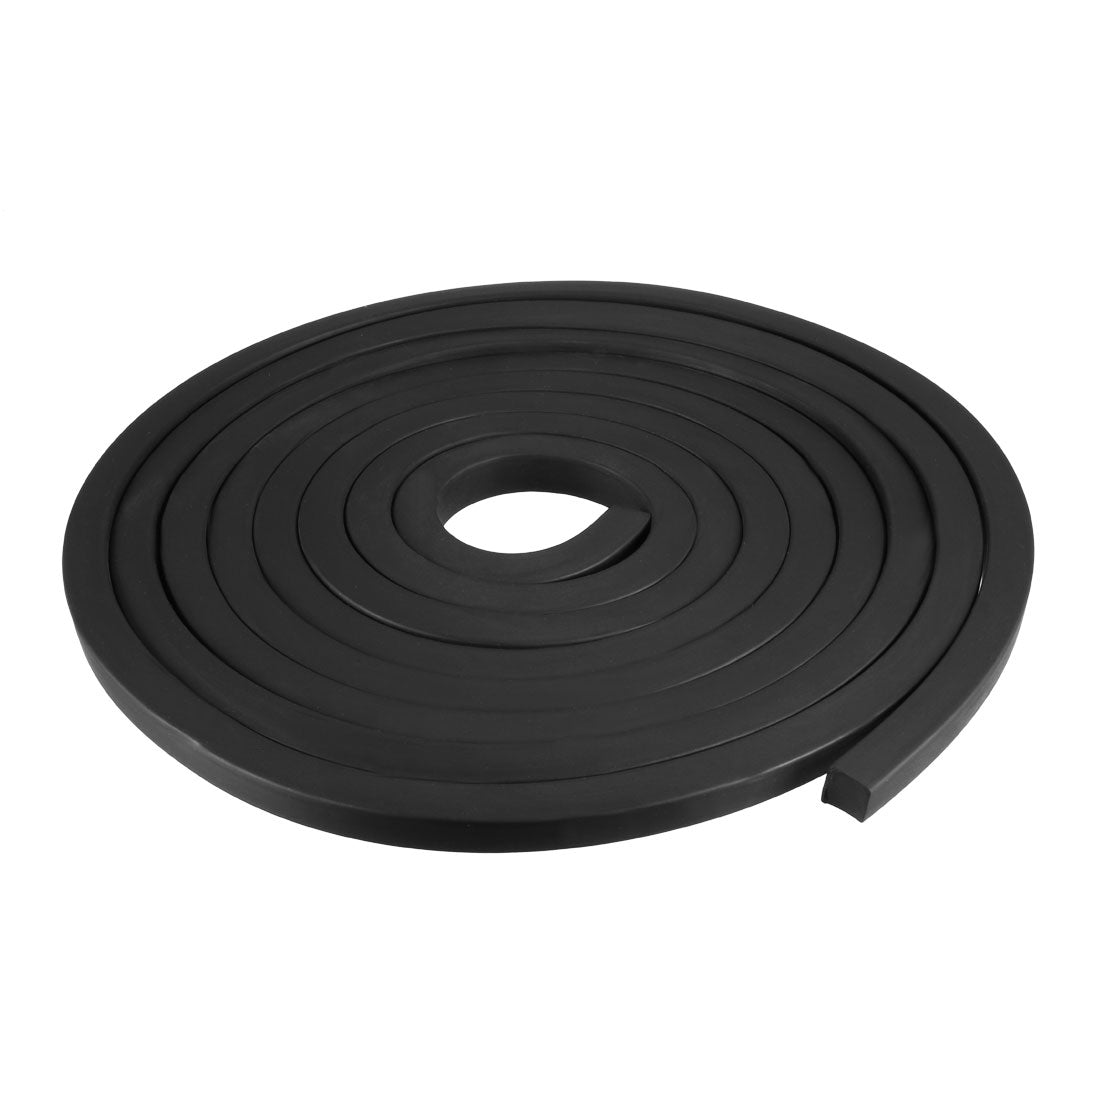 uxcell Uxcell Solid Rectangle Rubber Seal Strip 10mm Wide 10mm Thick, 3 Meters Long Black